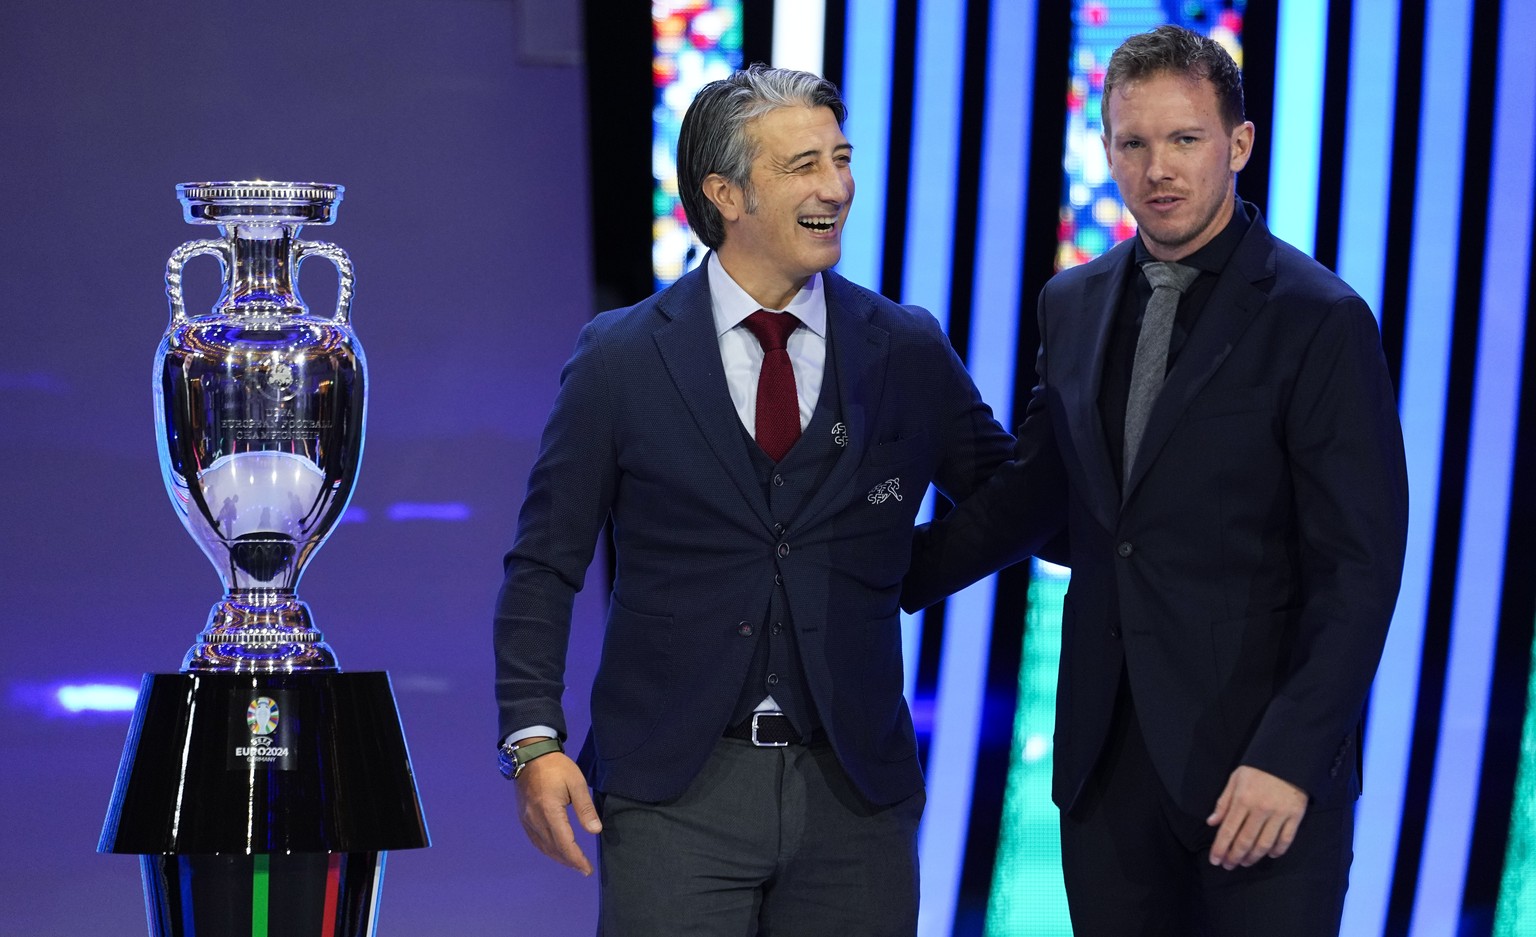 The head coaches of Switzerland Murat Yakin, left,and Germany Julian Nagelsmann, right, pose next to the trophy after the draw for the UEFA Euro 2024 soccer tournament finals in Hamburg, Germany, Satu ...